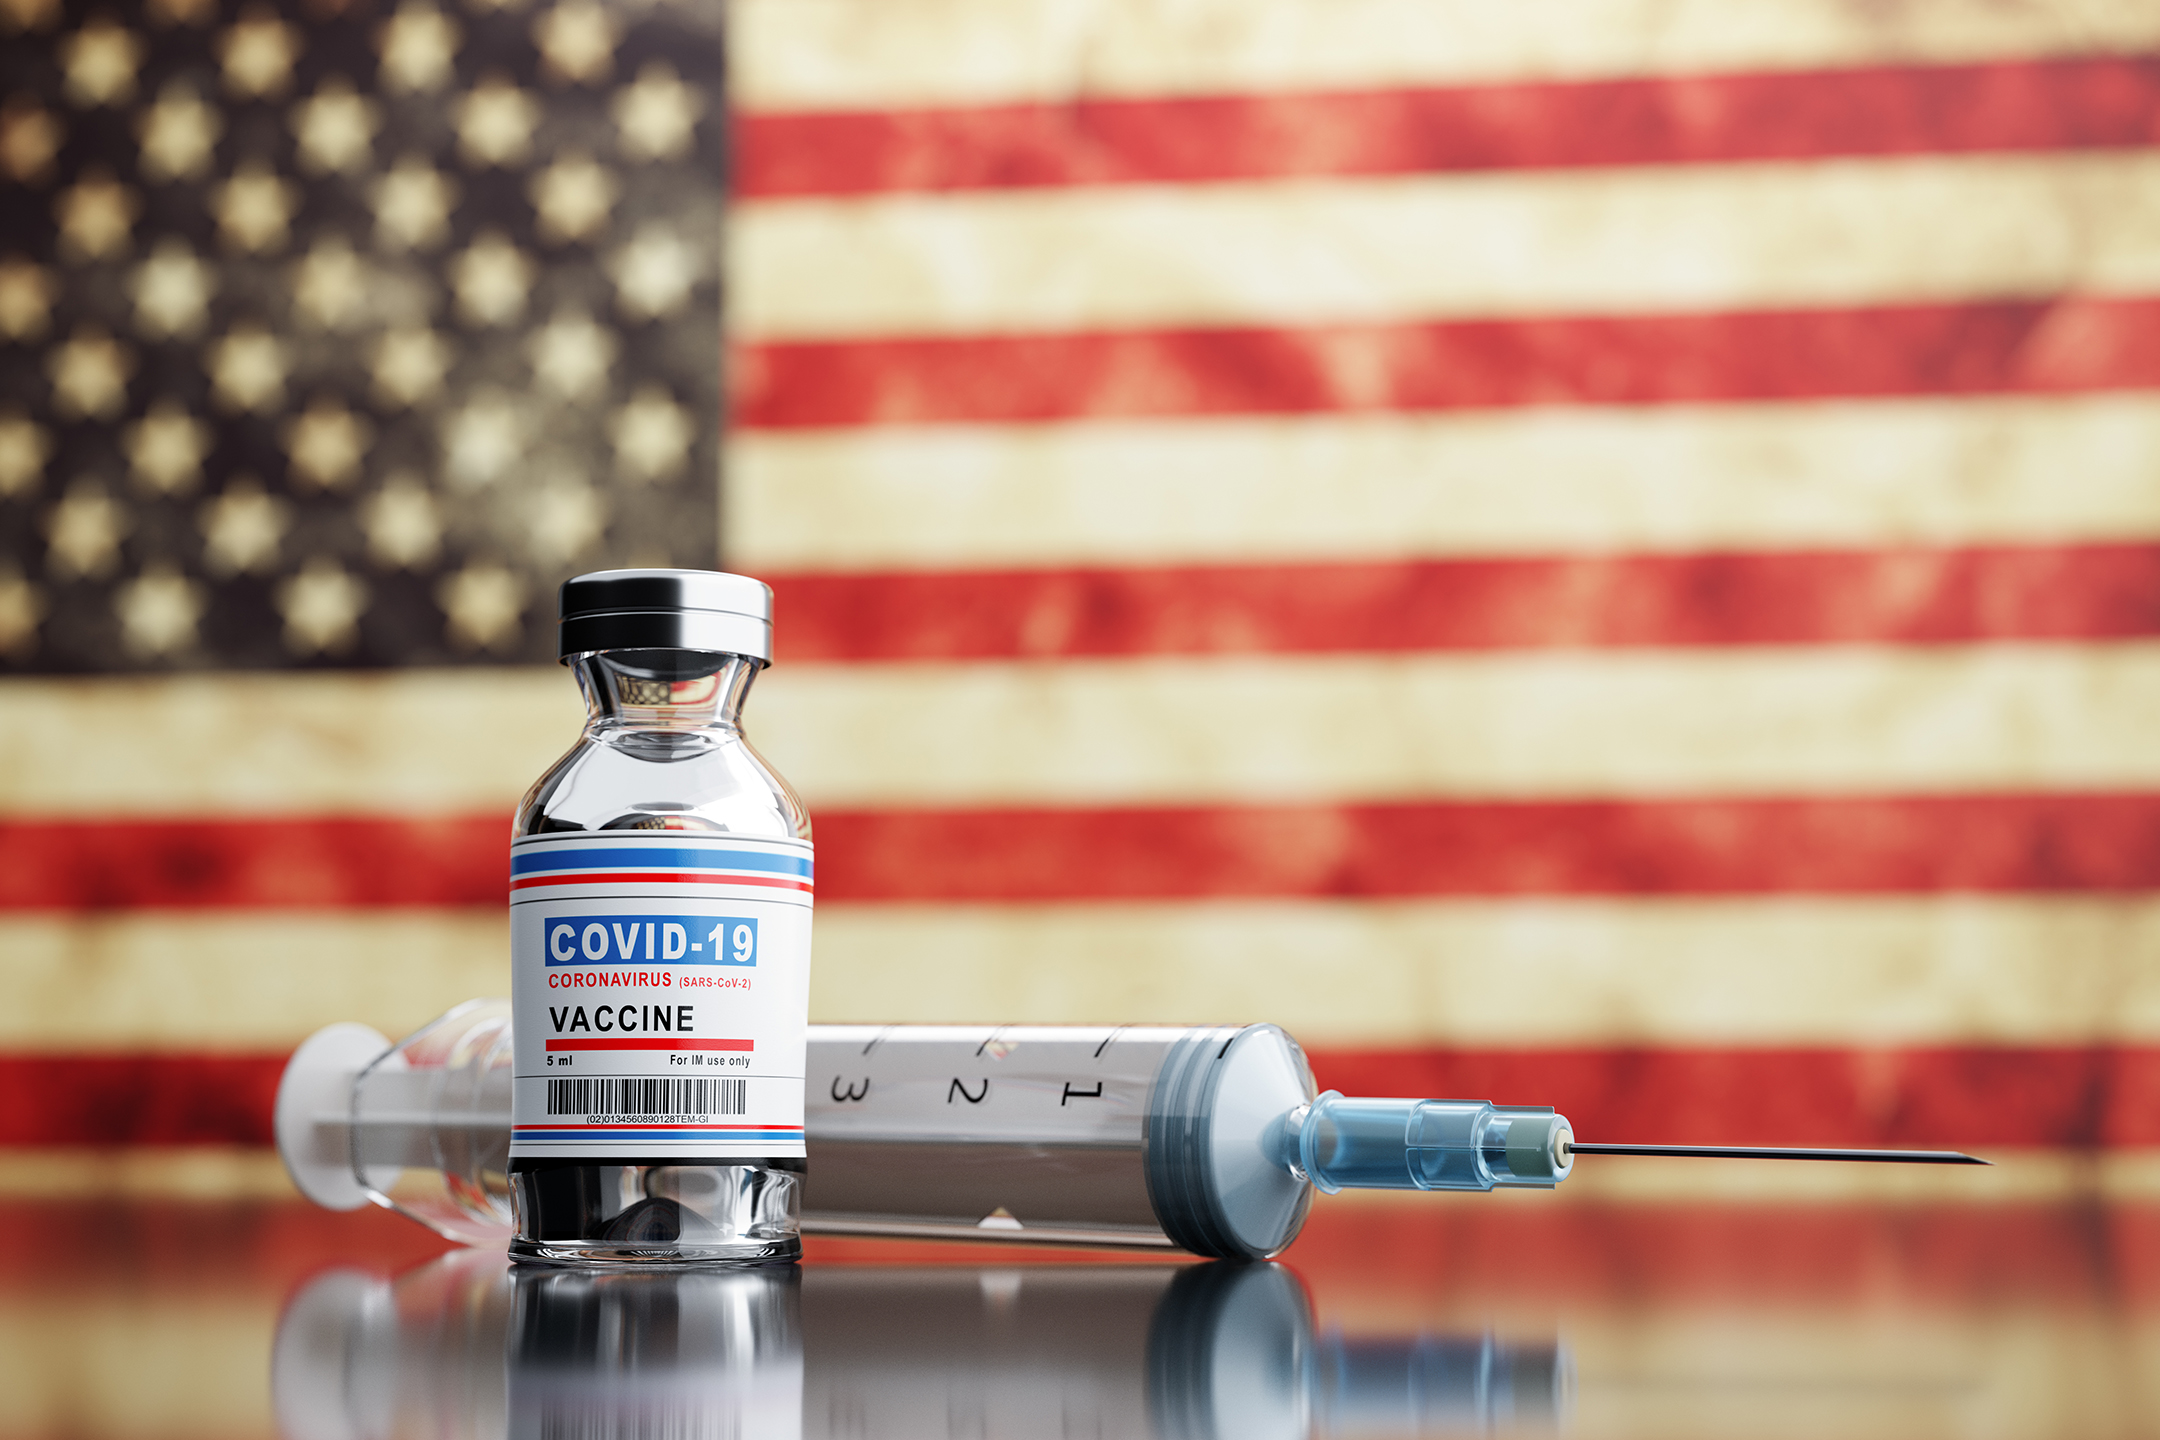 Mandatory vaccines for healthcare workers: a stepping-stone on the “path out of the pandemic”